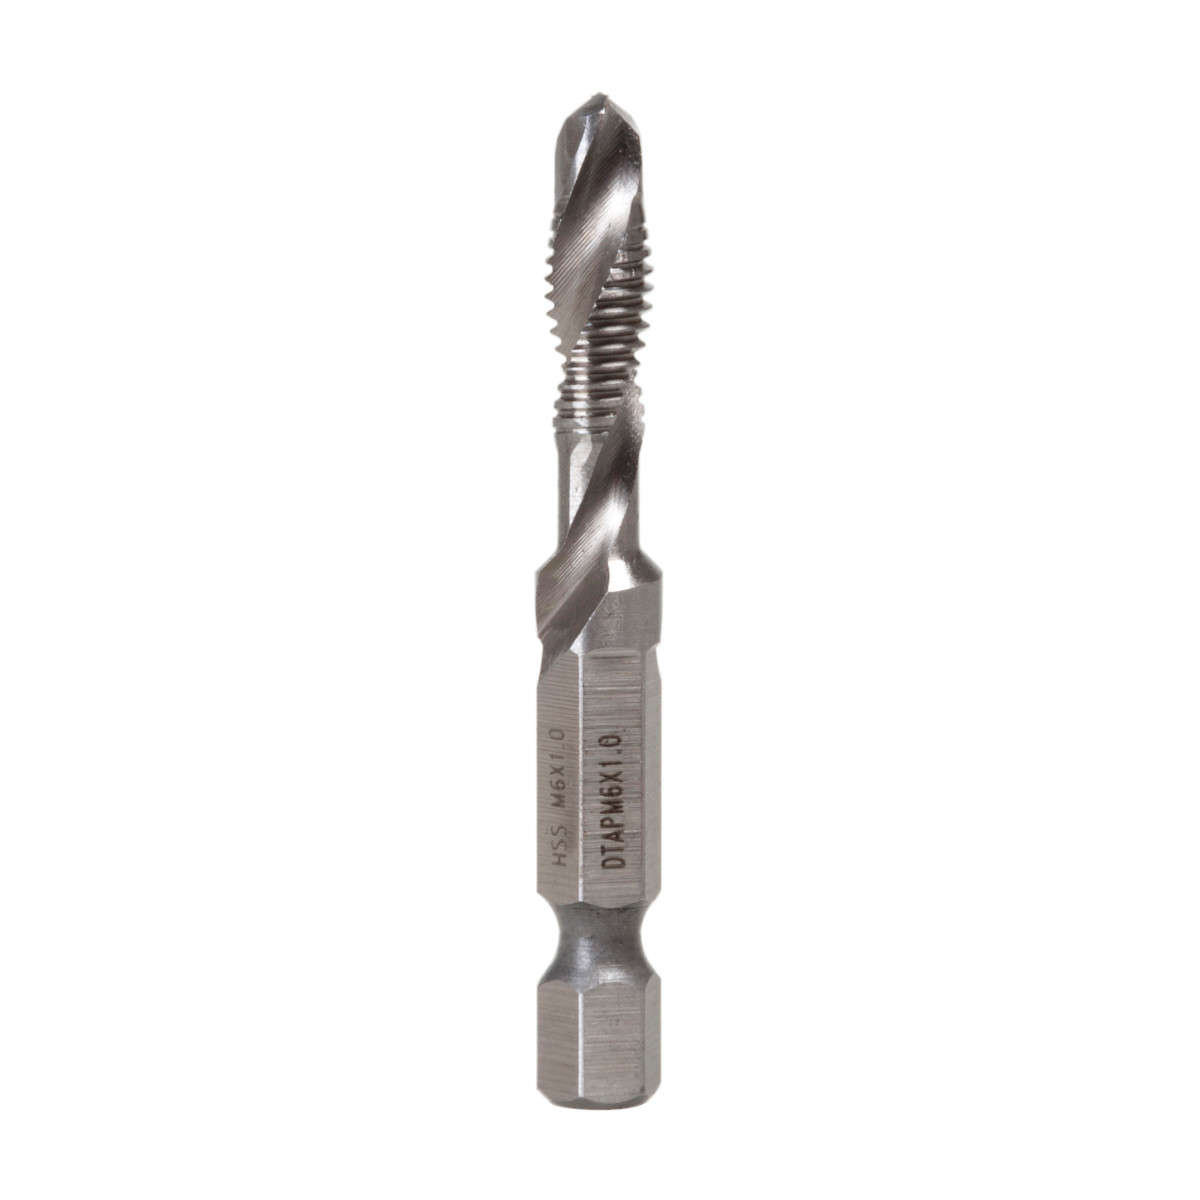 Combination Drill/Tap Bits.  M6 x 1.00.  Complete hole drilling, tapping and deburring/countersinking in one operation with power drill saves labor and time.  Back tapered beyond tap to prevent thread damage from over-drilling.  Deburr/countersink also provided on bit beyond back taper.  Made from hardened high-speed steel vs. carbon steel for longer life.  High quality hex shank to ensure strong connection to drill chuck.  Designed to tap up to 10-gauge metal.  Quick change adaptor included in both metric and standard kits.